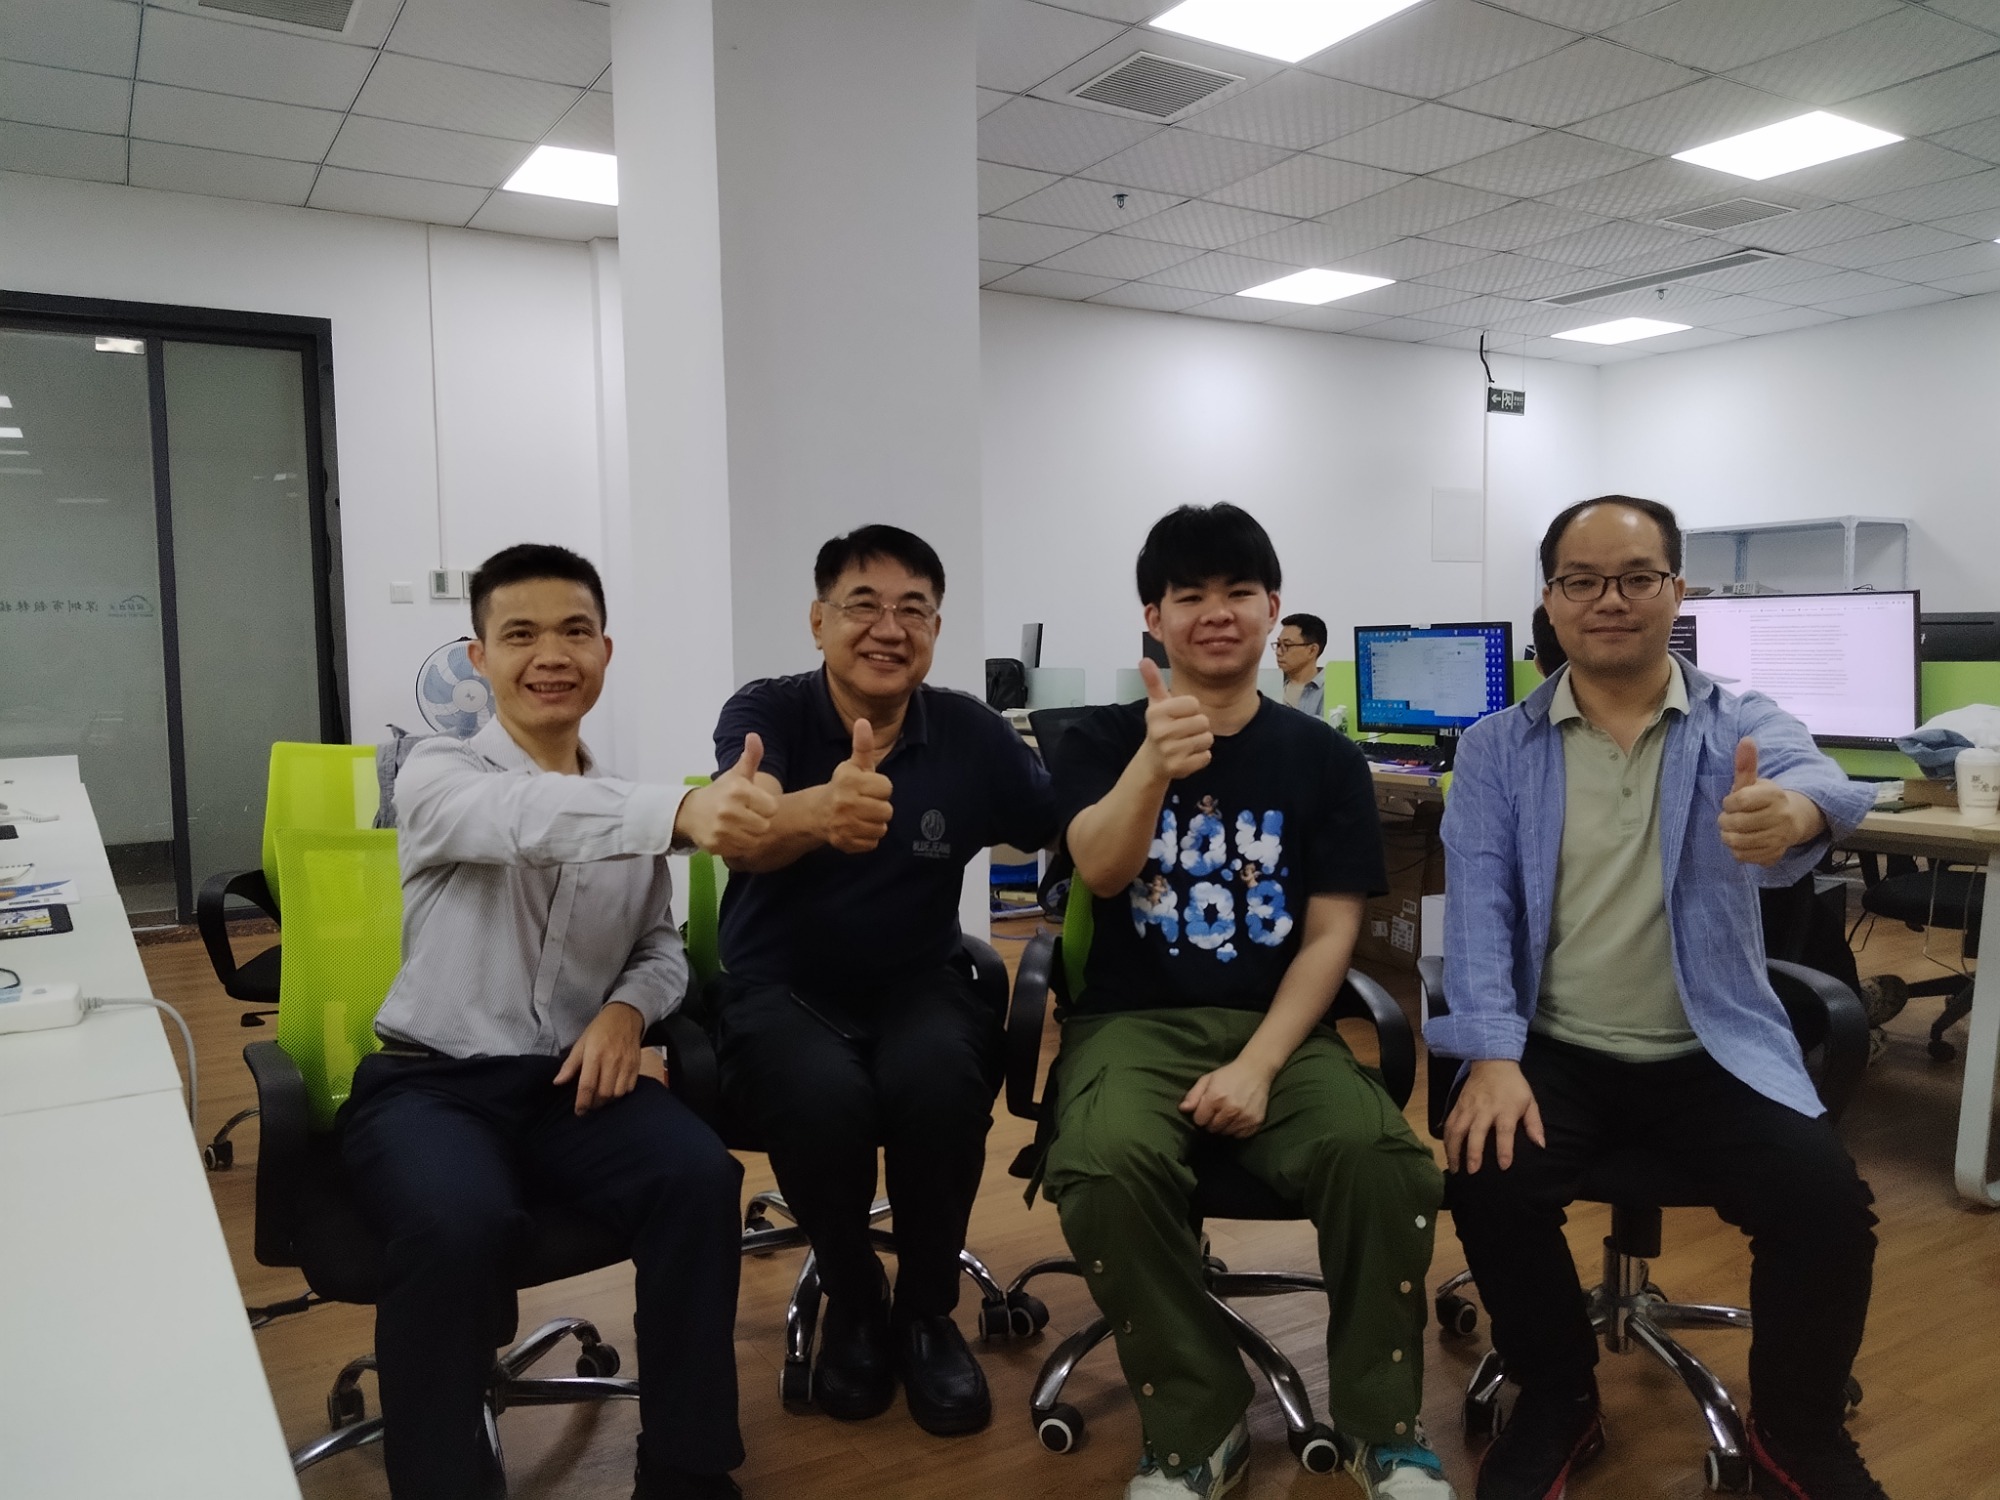 Welcome Mr. Chen from Malaysia to visit Shenzhen Beilai Technology Co., Ltd. to exchange professional knowledge related to the Internet of Things